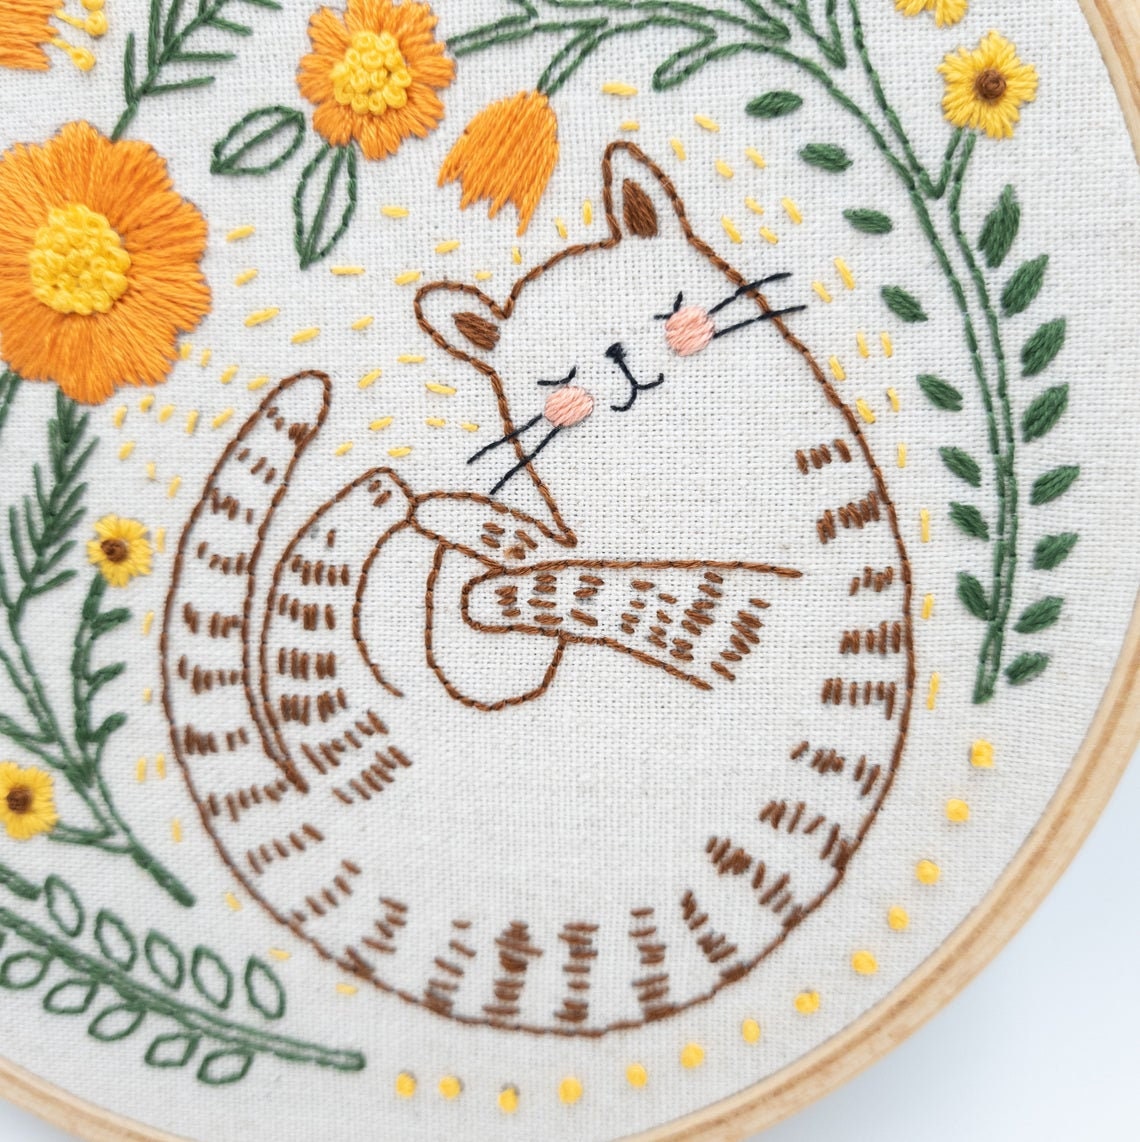  Zcargel Embroidery Set, Cat Pattern Embroidery Craft Kit Cross  Stitch Kit Cross Stitch Patterns DIY Embroidery Practice Bag for Training  Crafts Lessons Daily Life Easy Embroidery Kits for Beginners